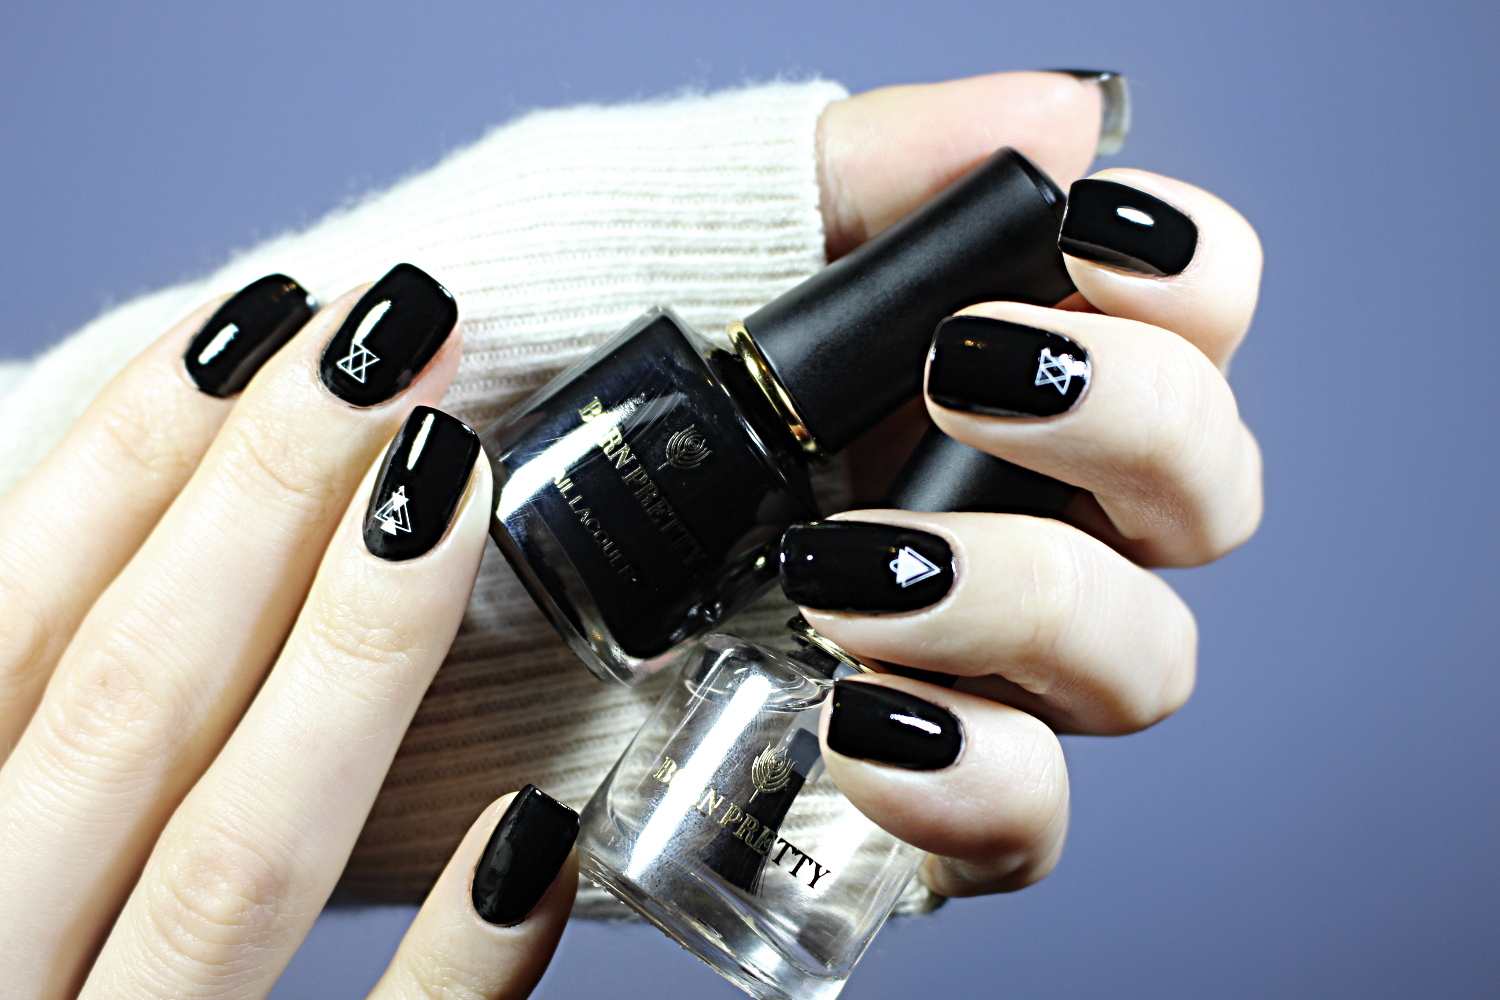 a close-up of a basic black nails looks with glossy finish on a short, natural nails